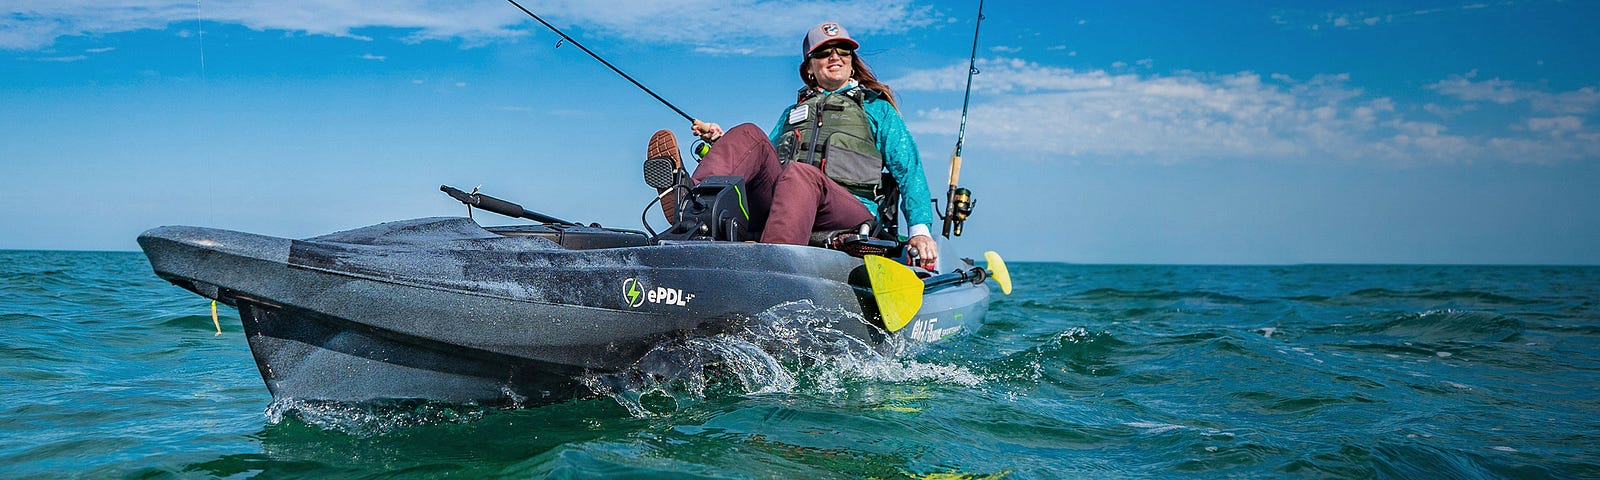 A woman angler pedaling to her next water hole in the ePDL+132 electric pedal assist kayak.